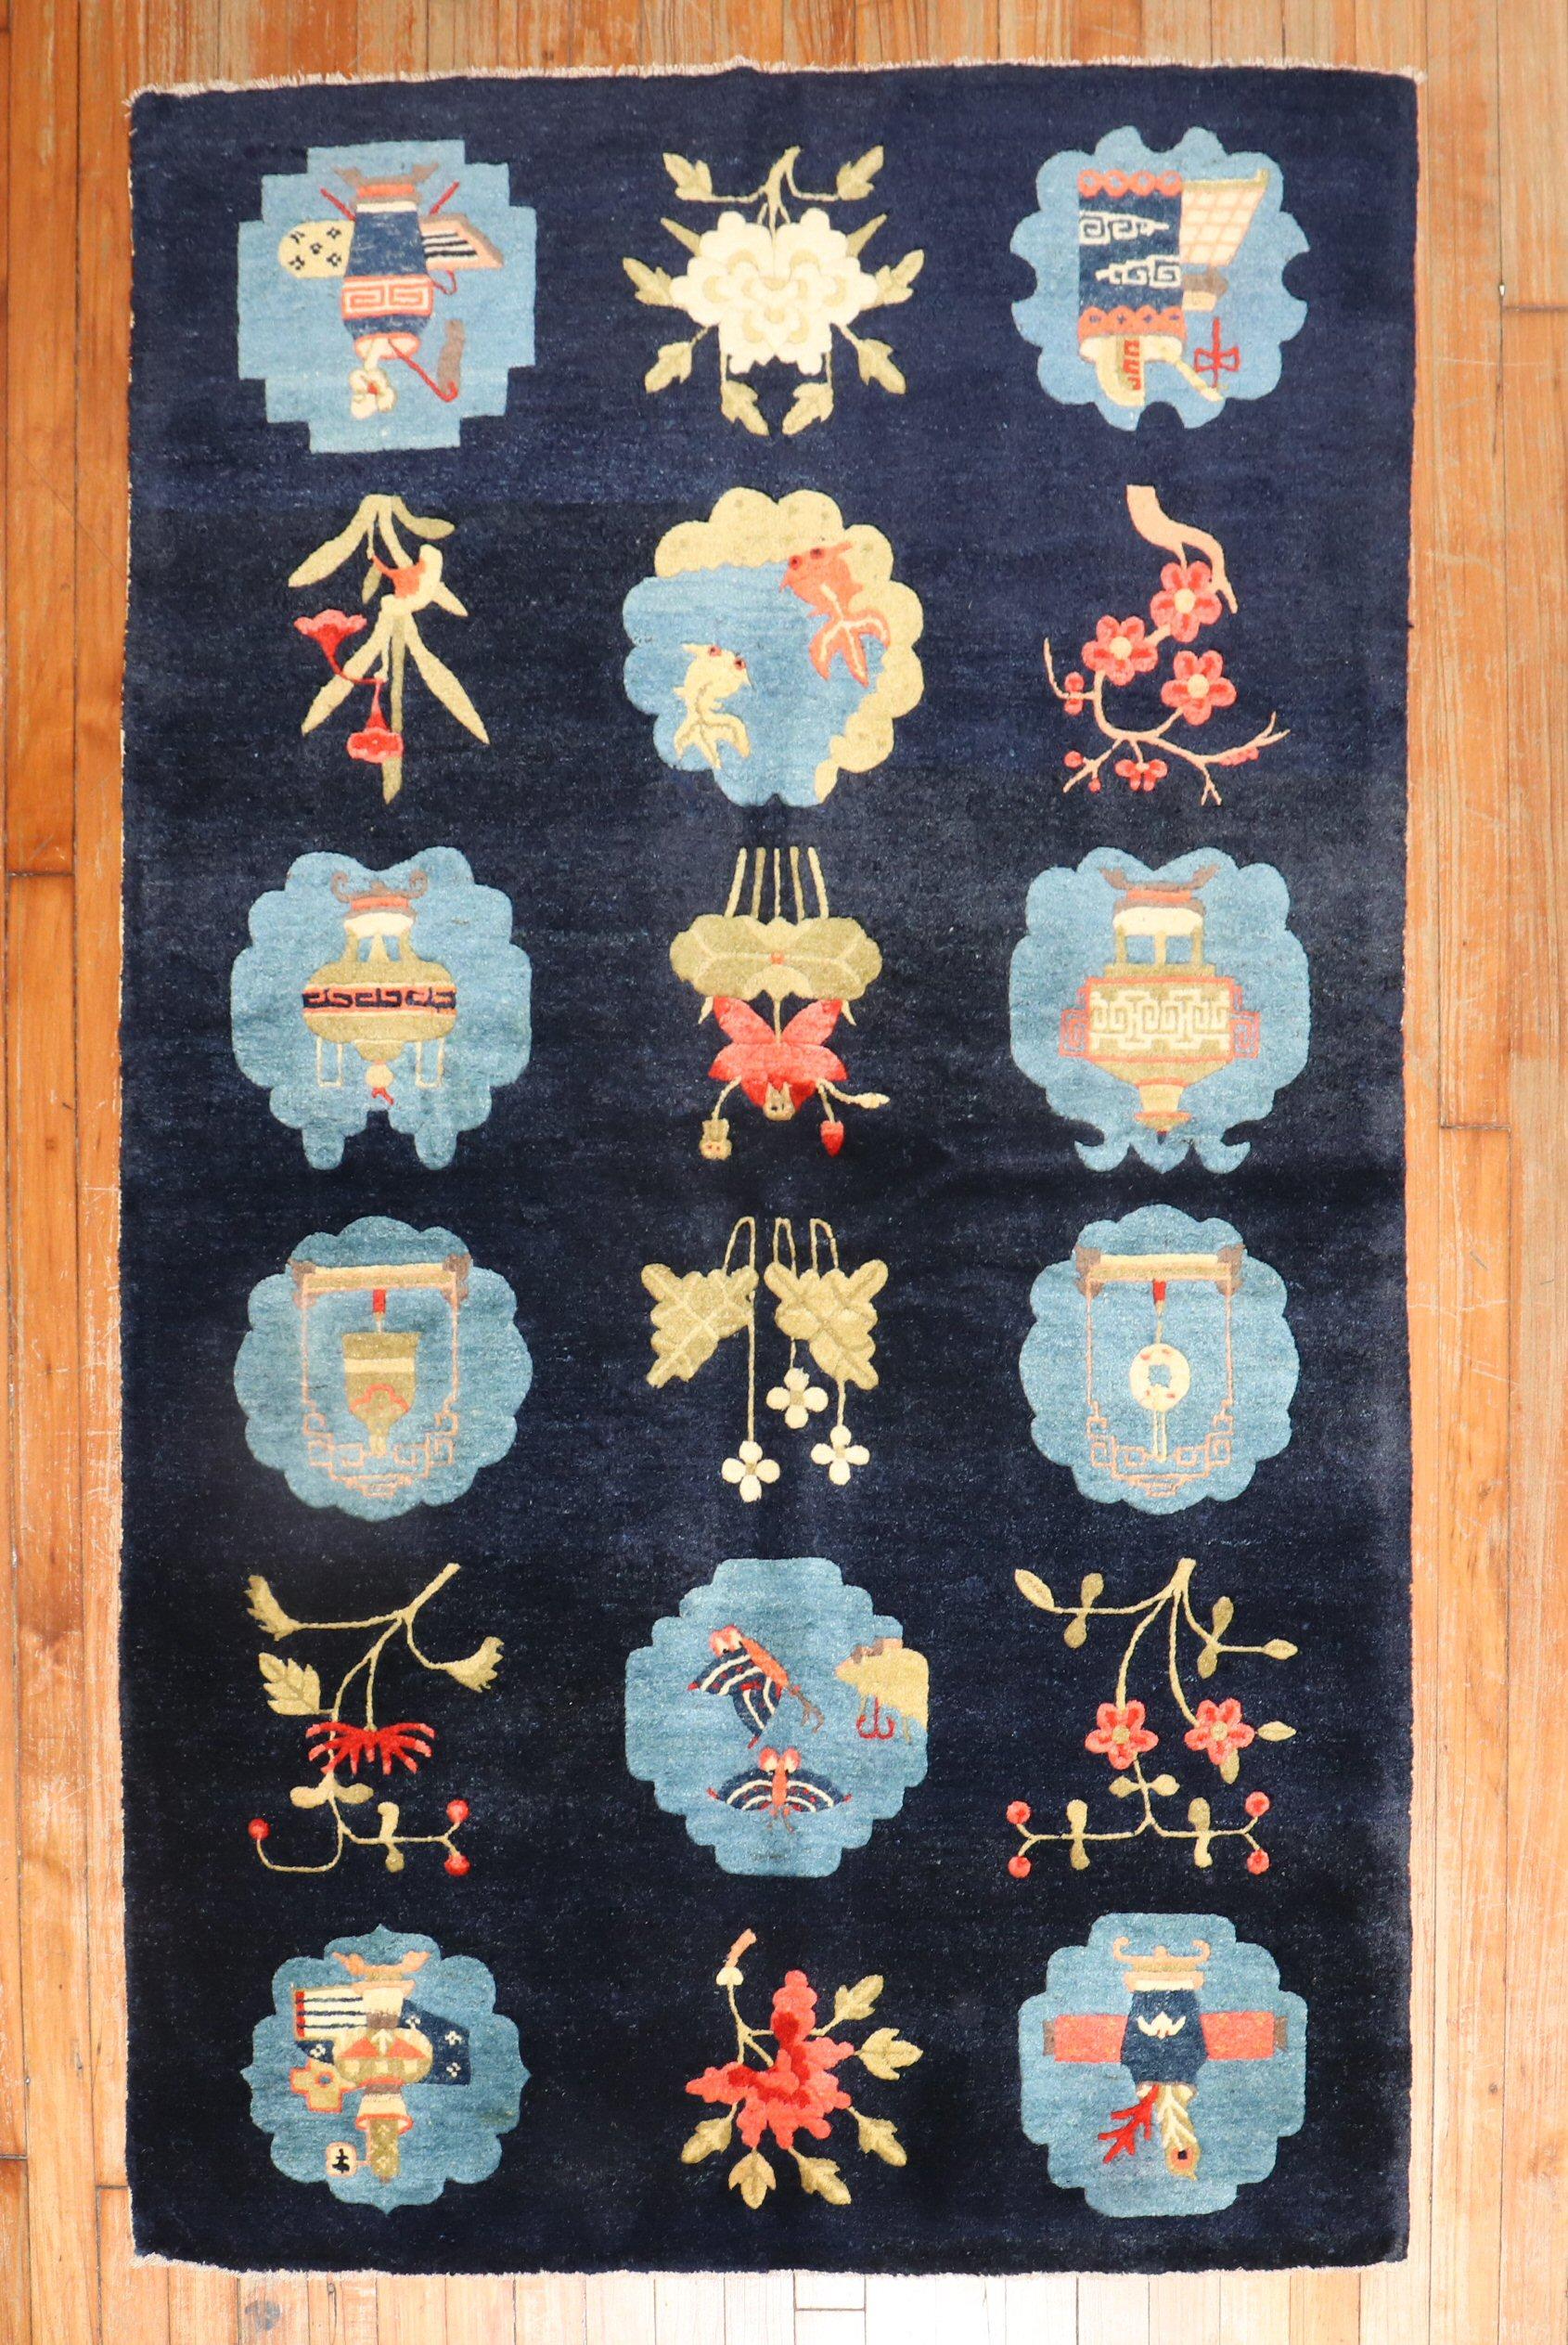 Scatter size Pictorial Motif Tibetan rug from the 2nd quarter of the 20th century.

Measure: 3'5'' x 5'6''.